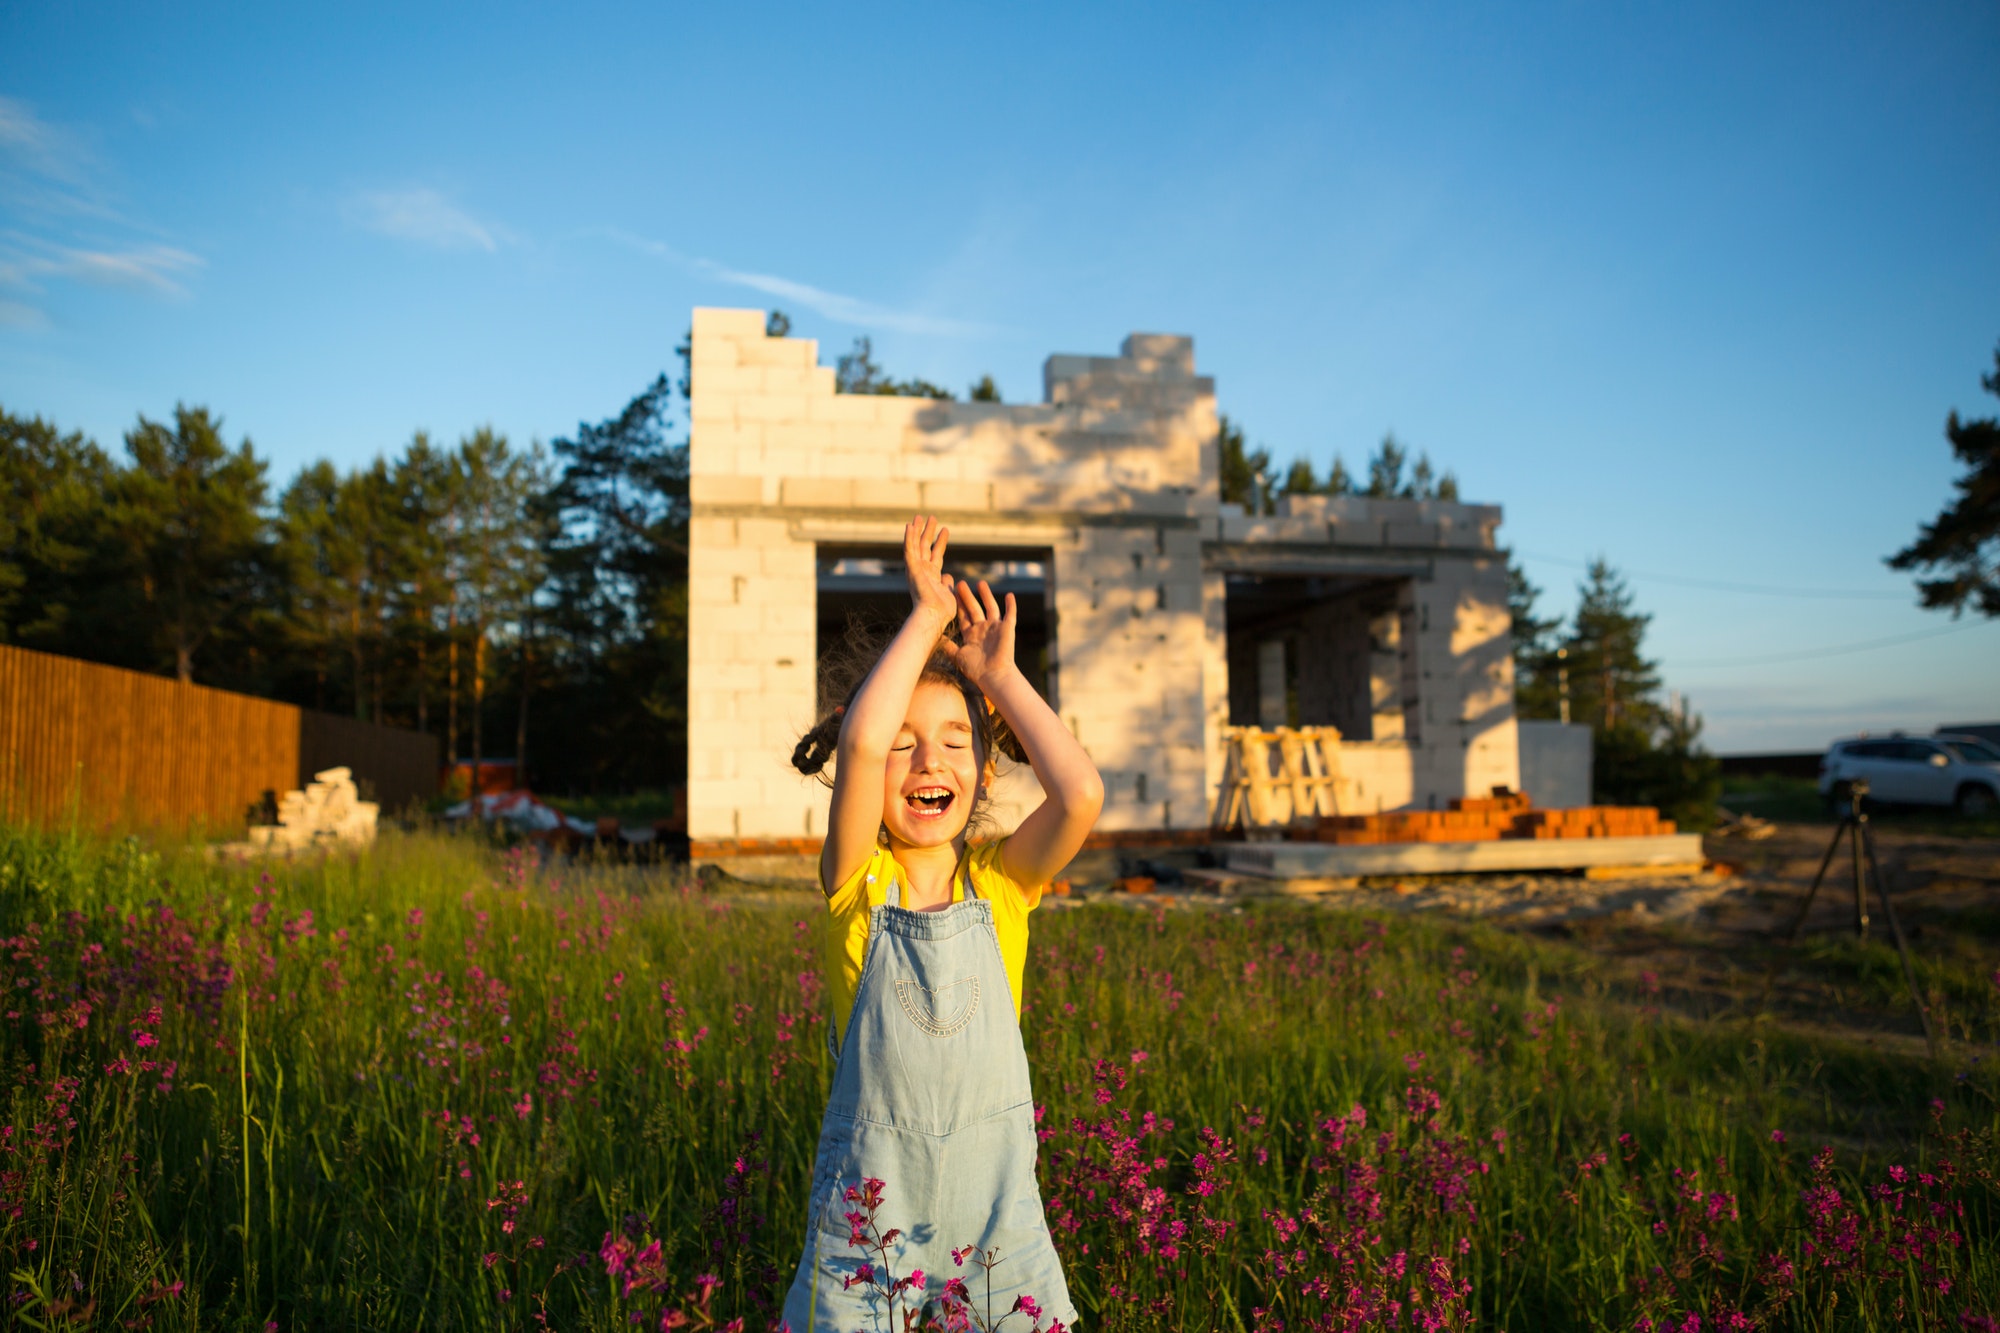 A little girl plays and dances near the construction site of her future house